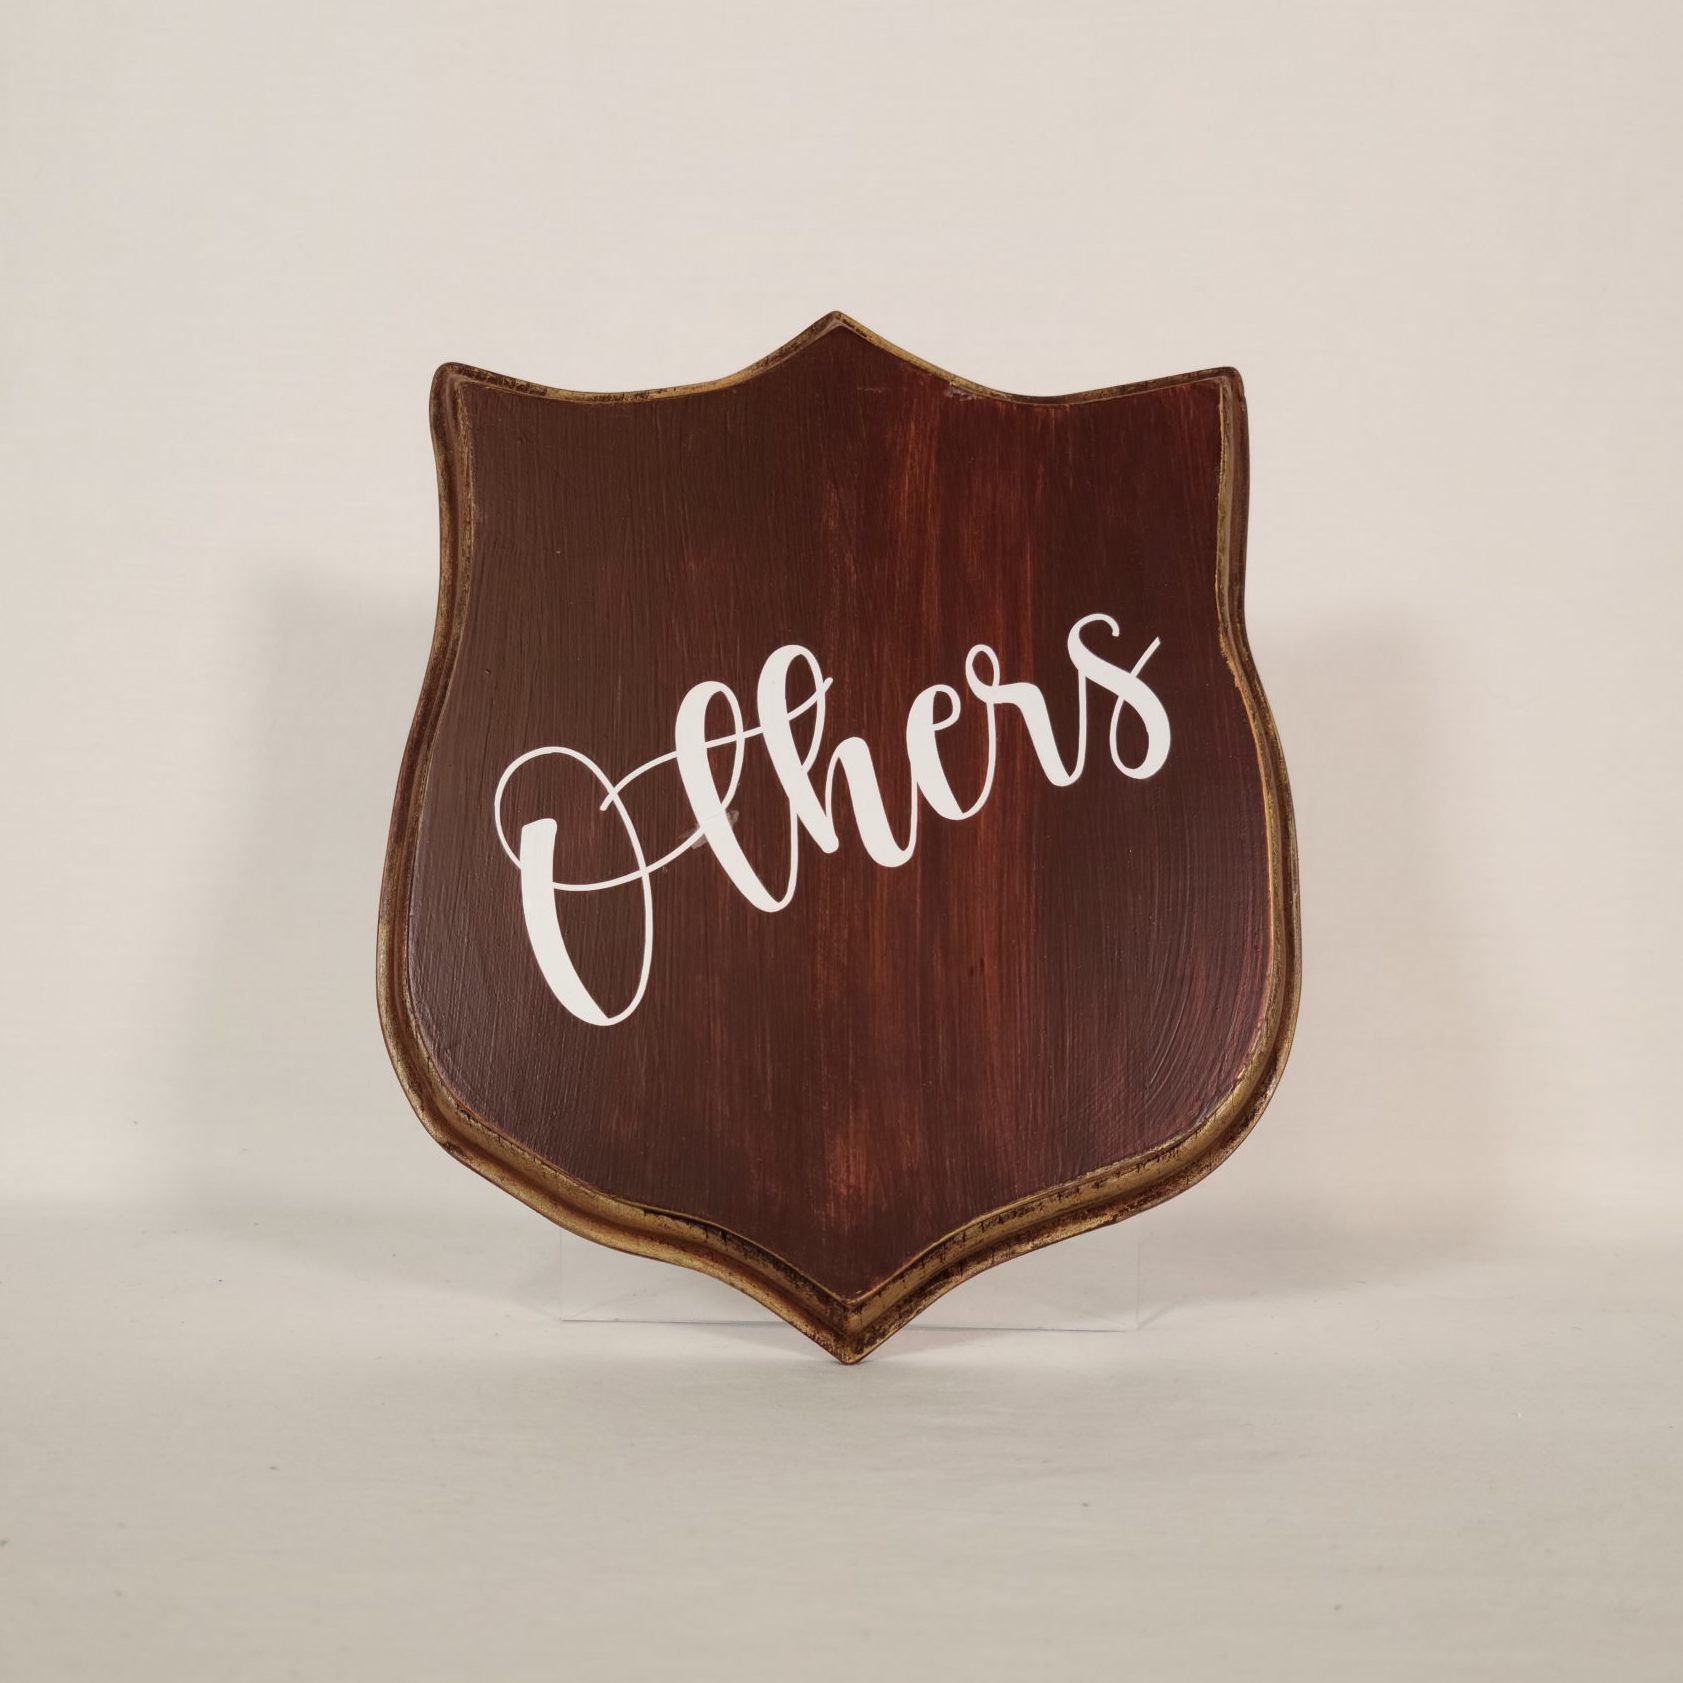 A brown wood shield shaped plaque with the word "others" written on it in white cursive font.